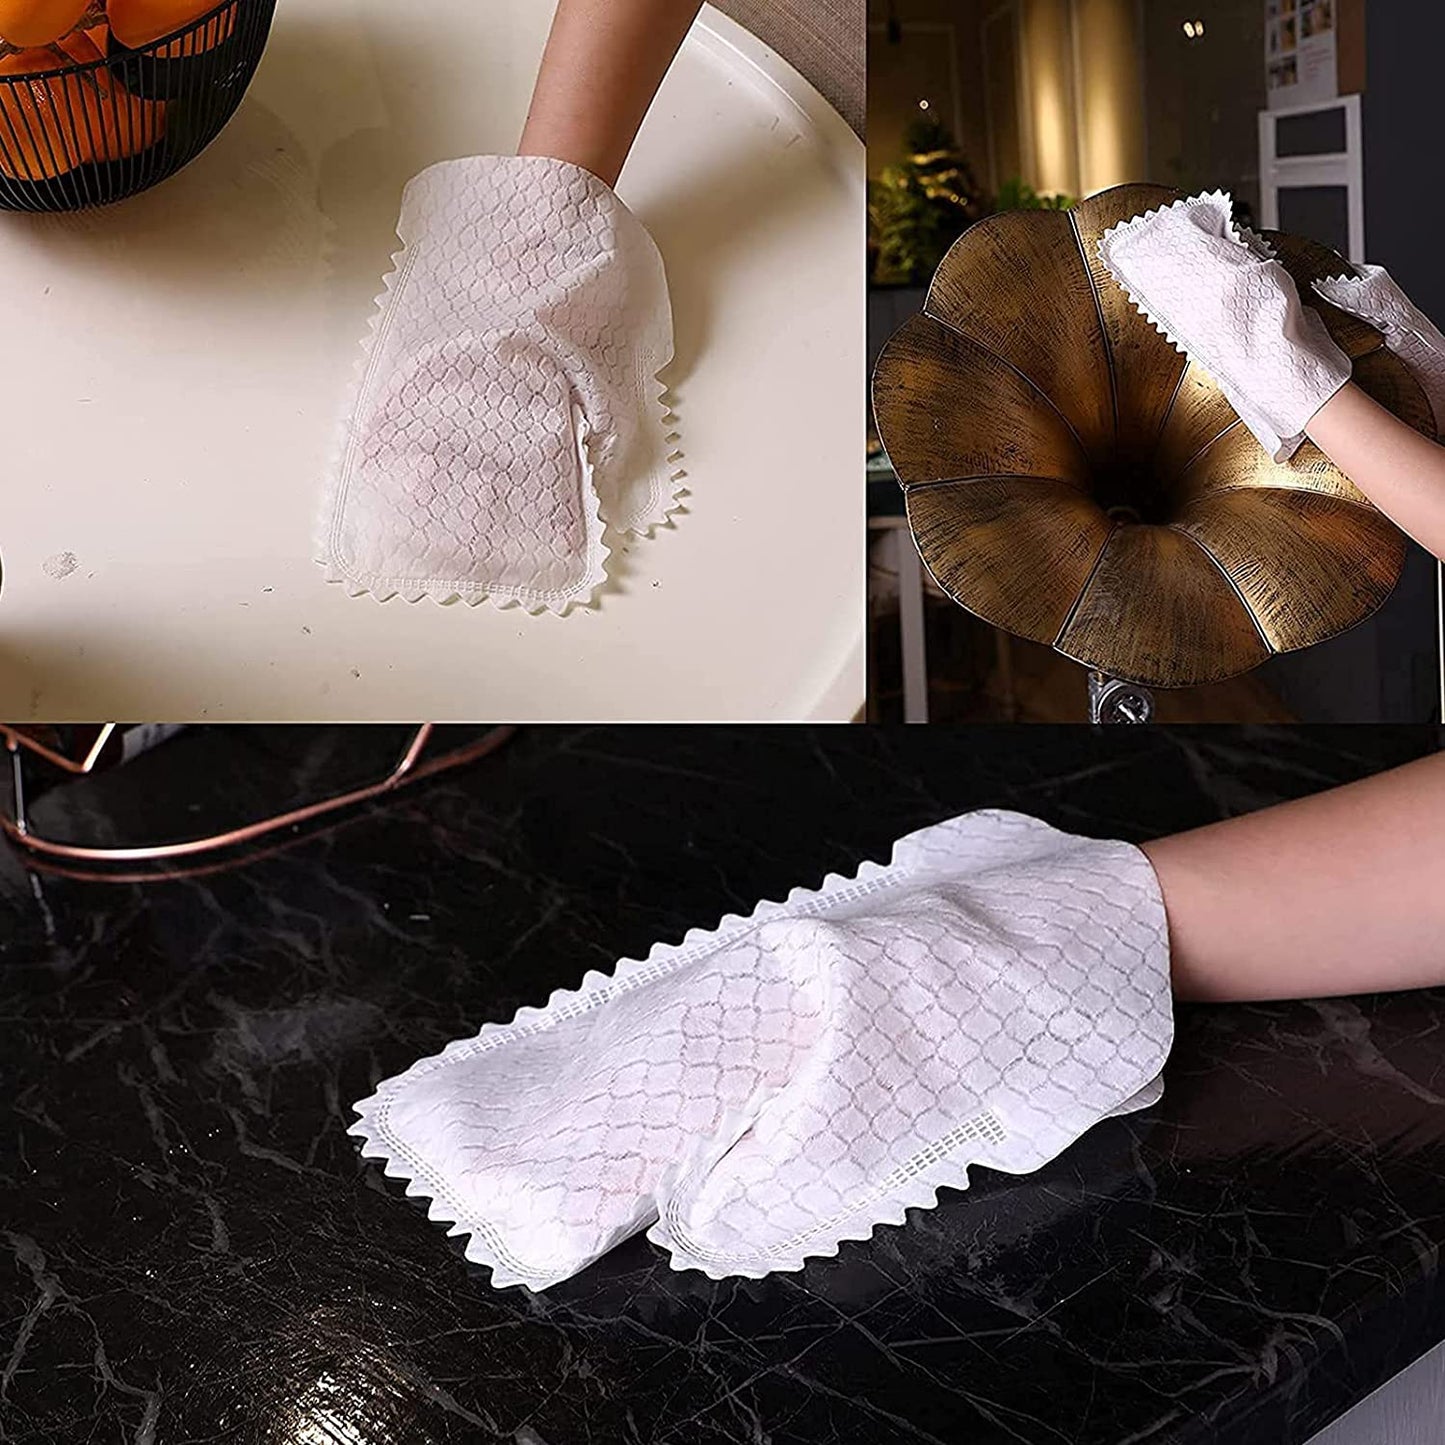 30pcs Dusting Mitts Disposable, Microfiber Auto Dusting Cleaning Gloves, Disposable Non-Woven Dust Removal Gloves, for Grab and Lock in Dust Pet Hair and Allergens